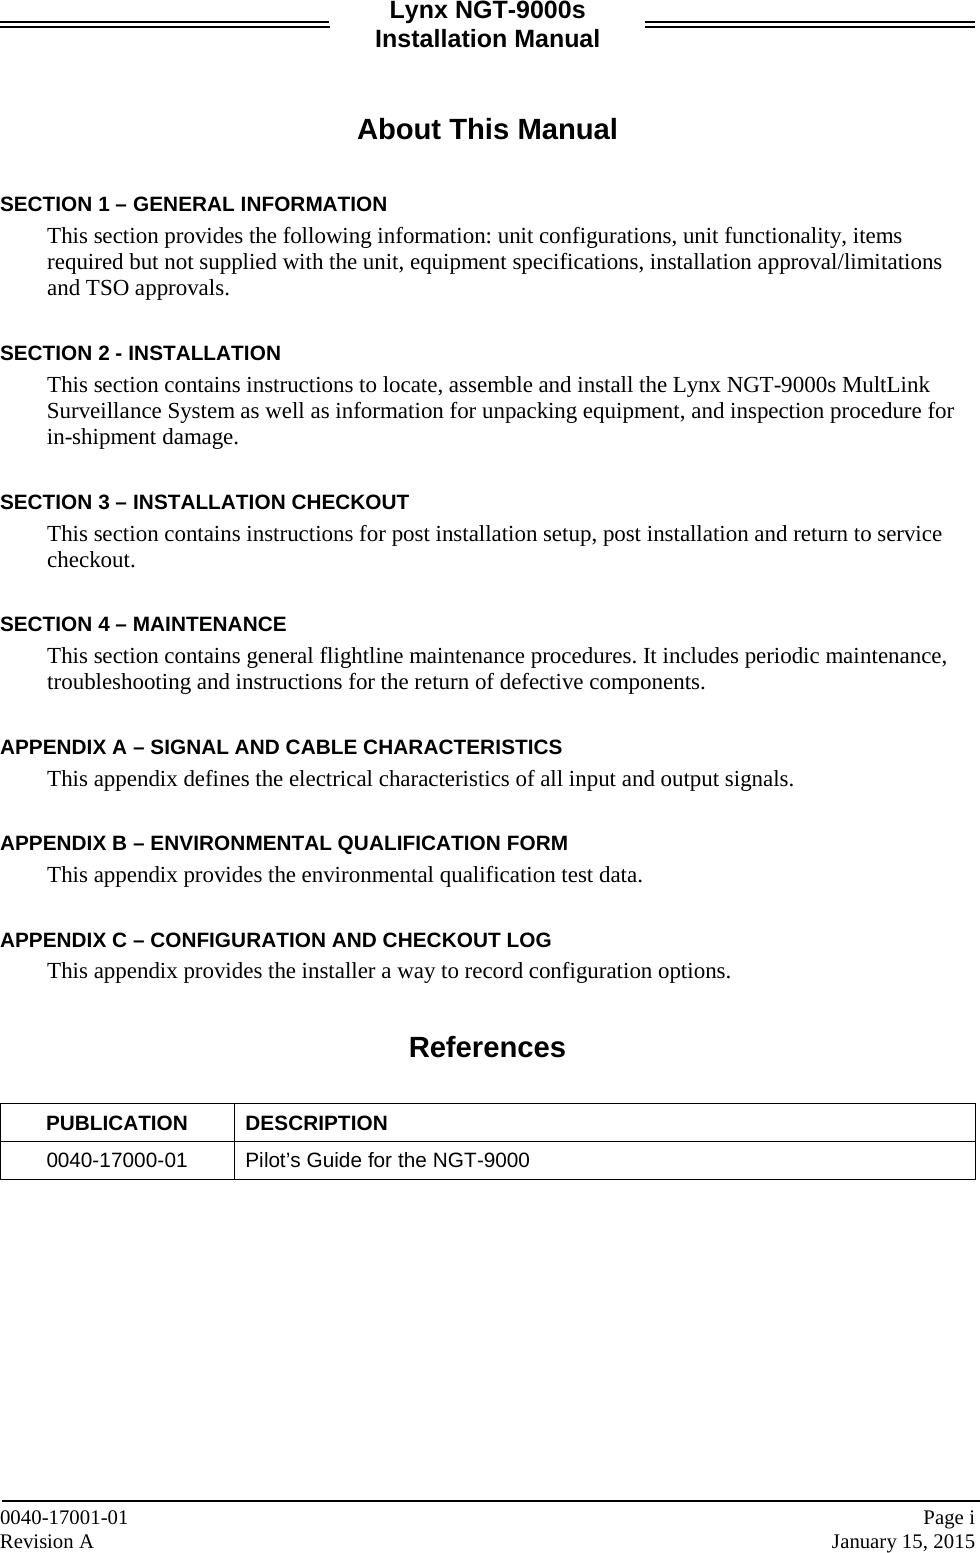 Lynx NGT-9000s Installation Manual   About This Manual  SECTION 1 – GENERAL INFORMATION This section provides the following information: unit configurations, unit functionality, items required but not supplied with the unit, equipment specifications, installation approval/limitations and TSO approvals.  SECTION 2 - INSTALLATION This section contains instructions to locate, assemble and install the Lynx NGT-9000s MultLink Surveillance System as well as information for unpacking equipment, and inspection procedure for in-shipment damage.  SECTION 3 – INSTALLATION CHECKOUT This section contains instructions for post installation setup, post installation and return to service checkout.  SECTION 4 – MAINTENANCE This section contains general flightline maintenance procedures. It includes periodic maintenance, troubleshooting and instructions for the return of defective components.  APPENDIX A – SIGNAL AND CABLE CHARACTERISTICS This appendix defines the electrical characteristics of all input and output signals.  APPENDIX B – ENVIRONMENTAL QUALIFICATION FORM This appendix provides the environmental qualification test data.   APPENDIX C – CONFIGURATION AND CHECKOUT LOG This appendix provides the installer a way to record configuration options.   References  PUBLICATION DESCRIPTION 0040-17000-01 Pilot’s Guide for the NGT-9000     0040-17001-01    Page i Revision A    January 15, 2015 